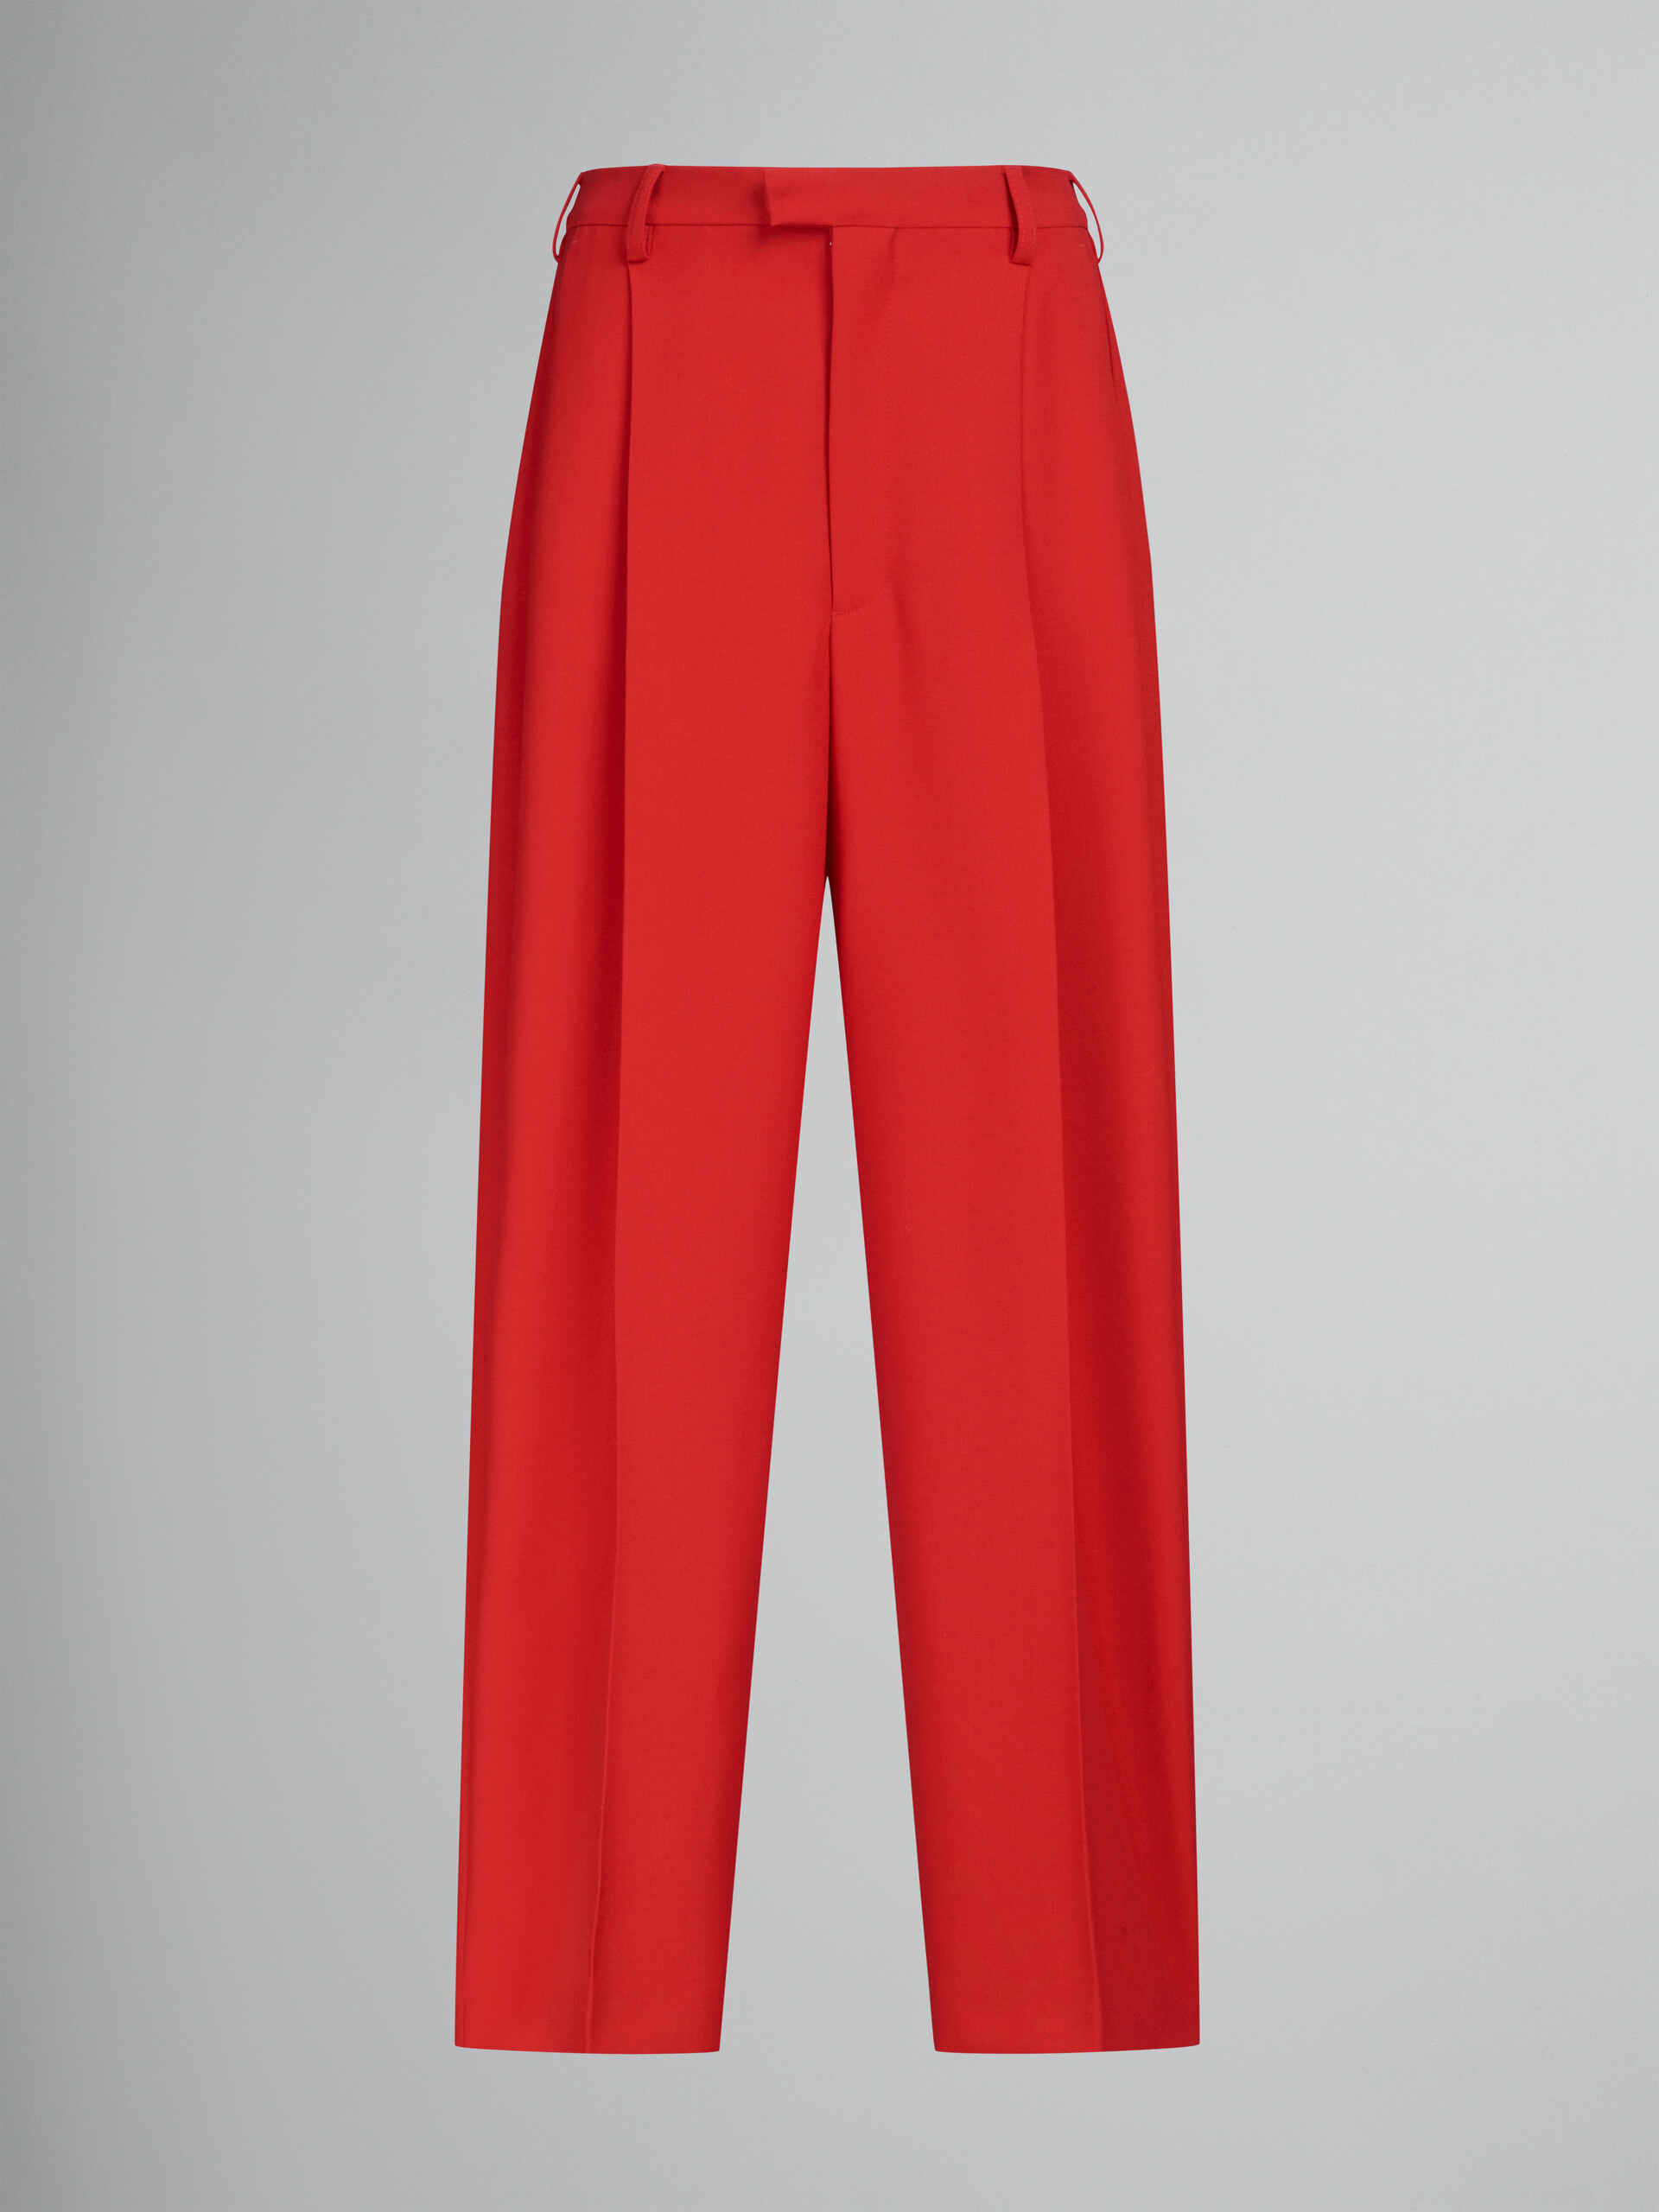 MARNI, Red Women's Casual Pants